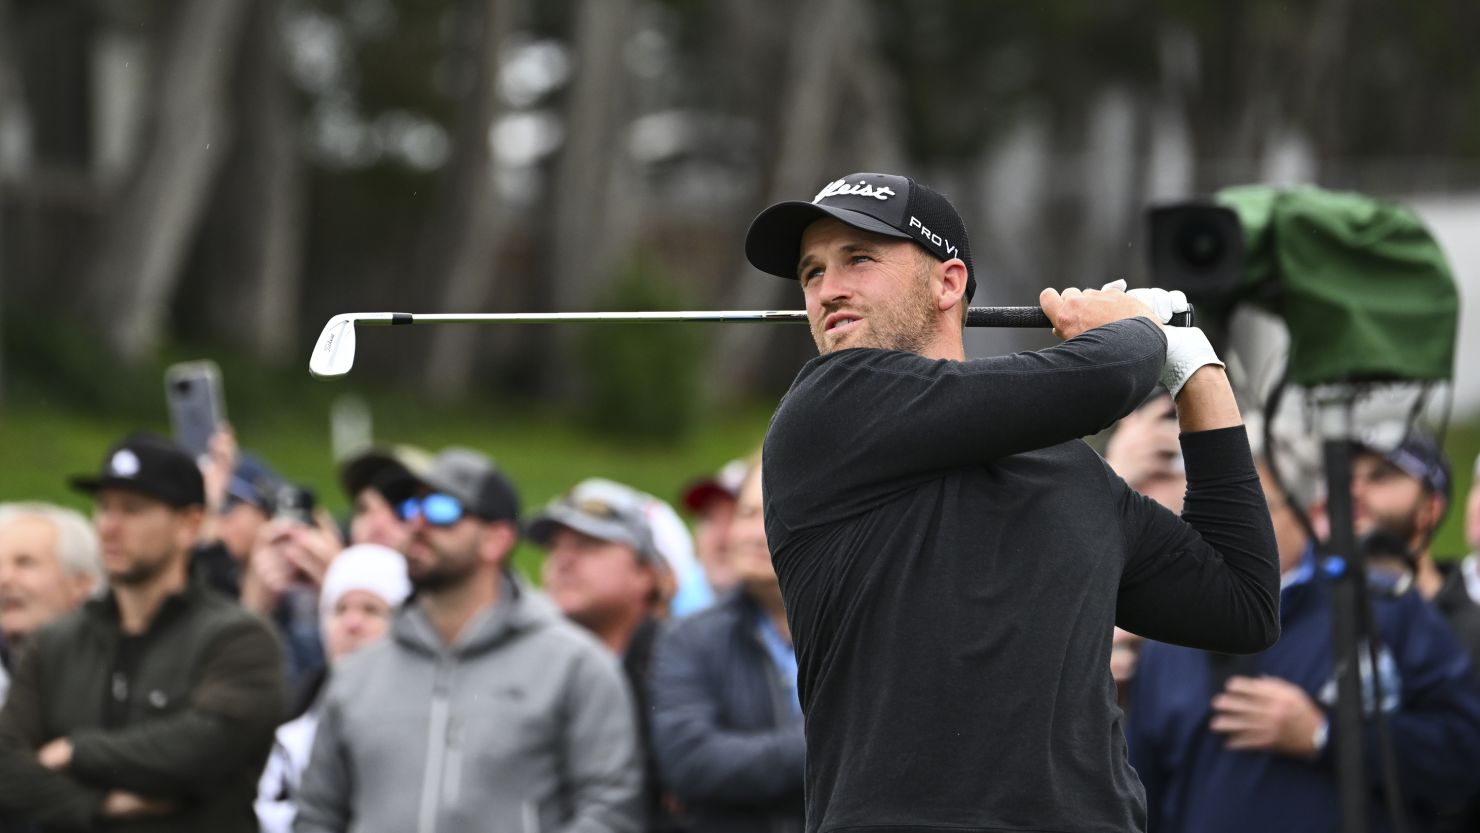 Clark hits his tee shot on the 17th hole at Pebble Beach.